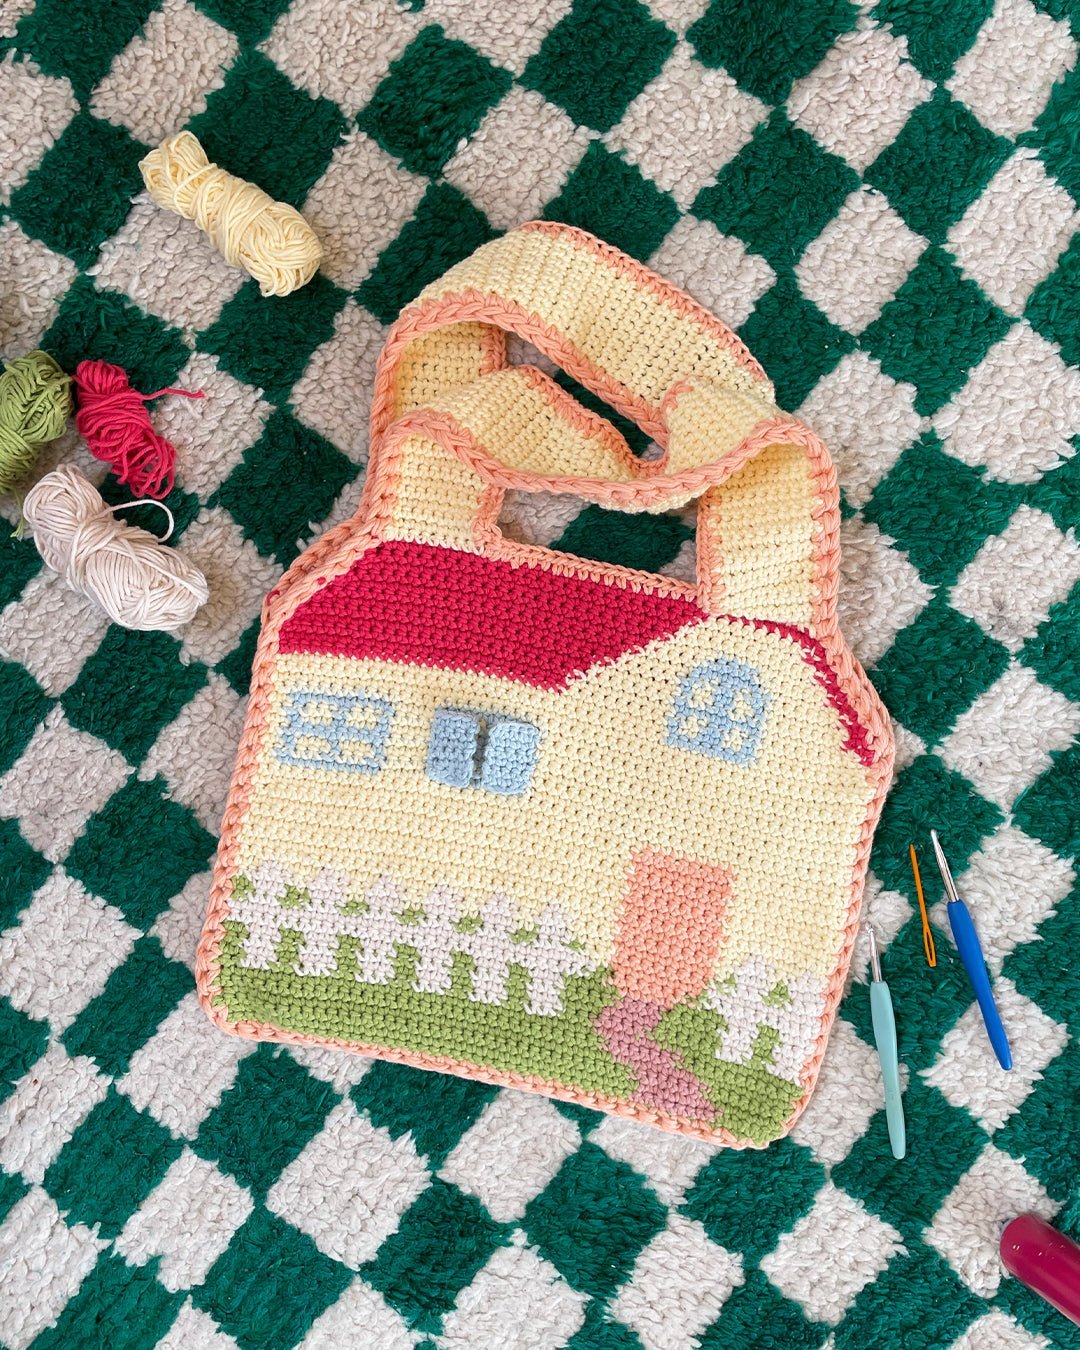 Crochet Bag Pattern ✧ This House Is Not A Home ✧ by devout hand